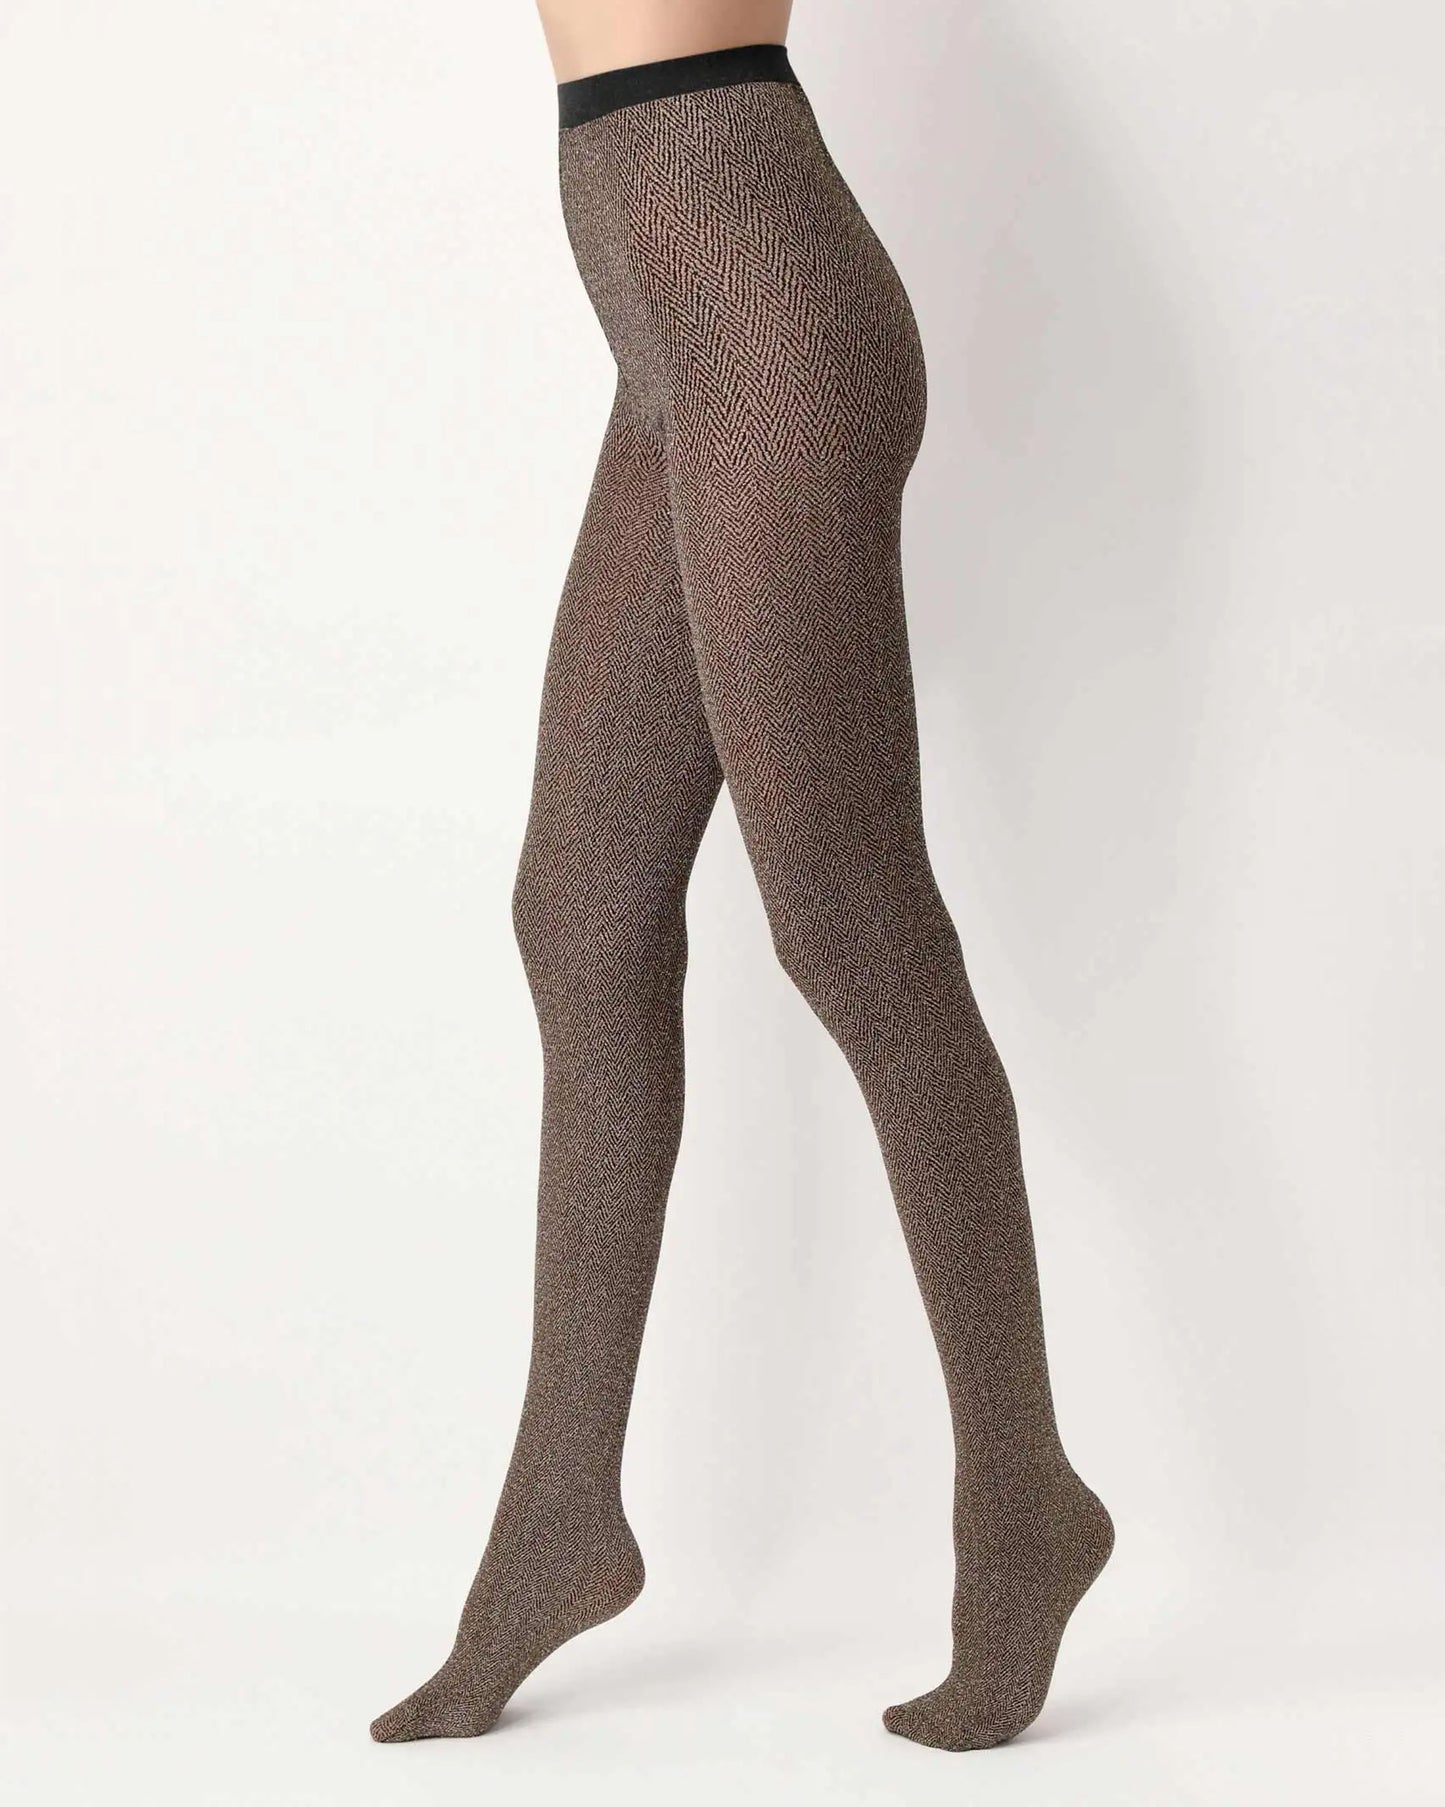 Oroblù Sparkle Tweed Tights - Opaque two-toned tweed herringbone patterned fashion tights in beige and black with sparkly lamé